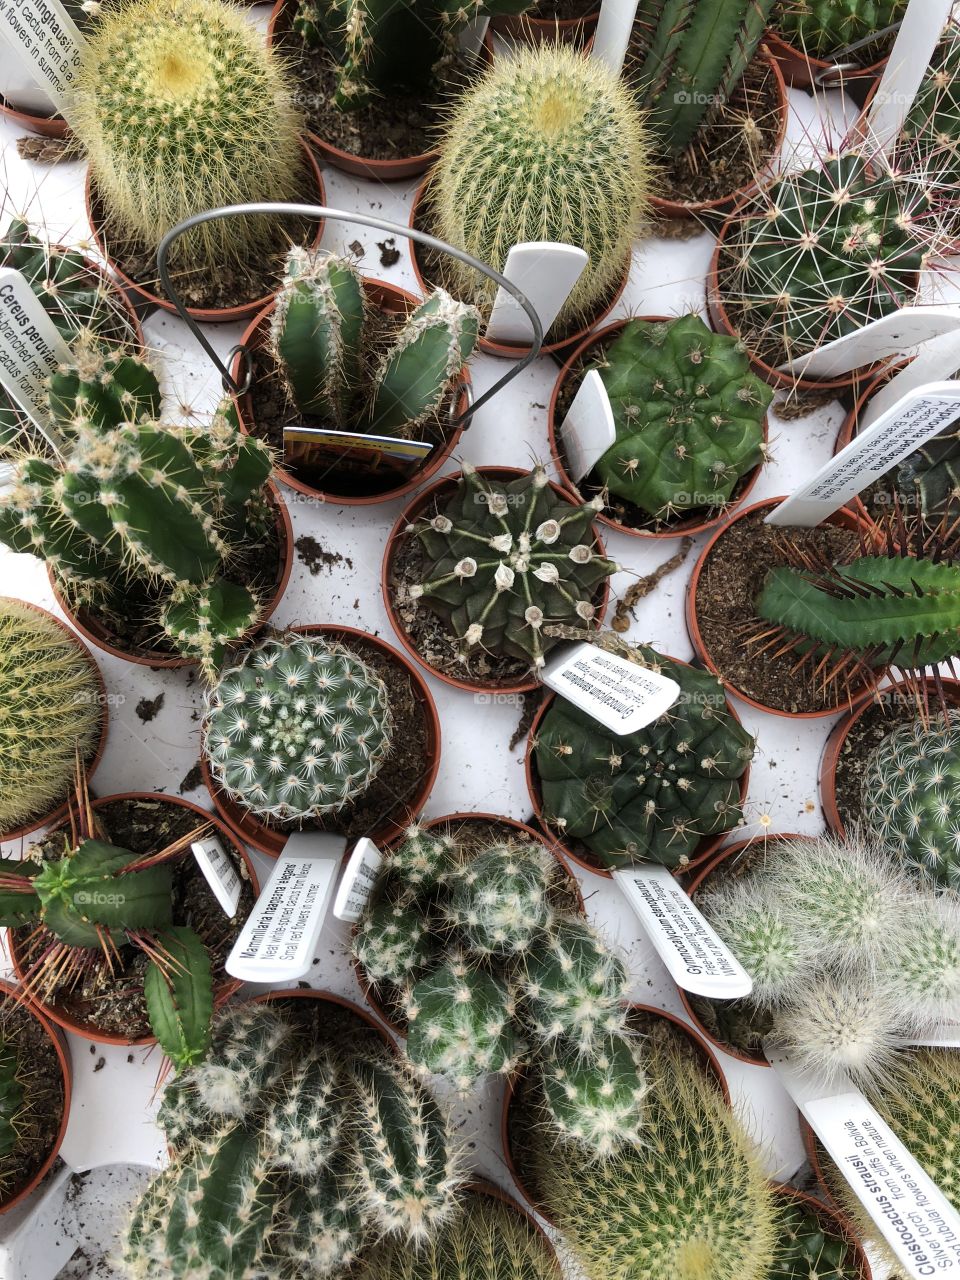 Cacti for all tastes and budgets here, plenty of choice to suit any cactus lover.